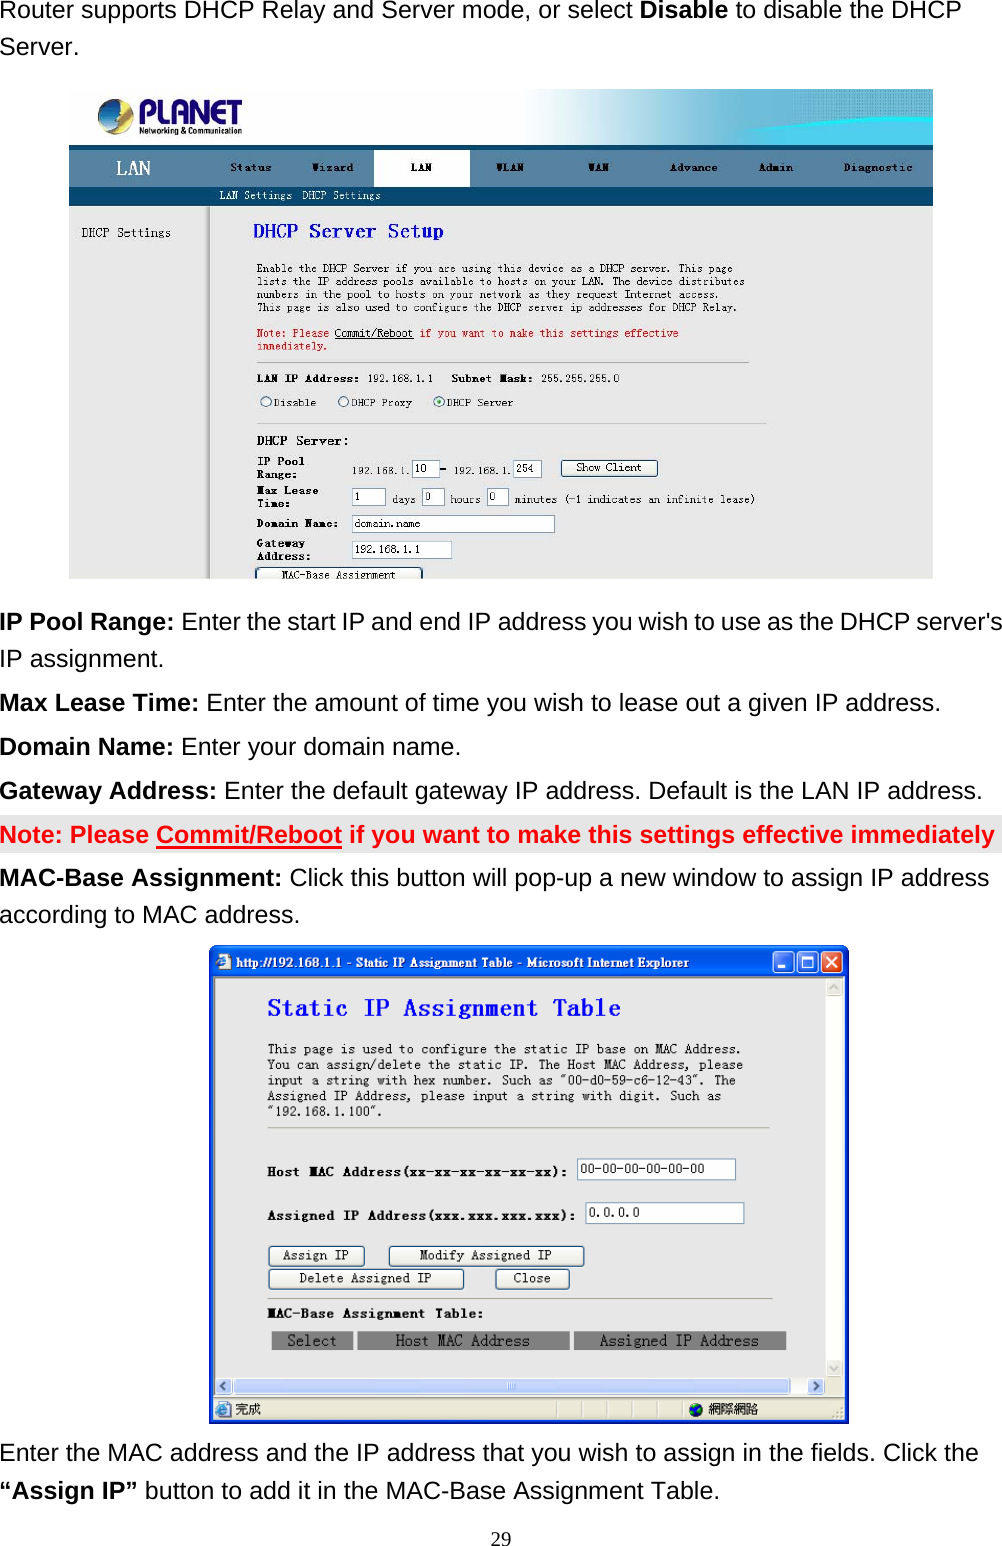 Router supports DHCP Relay and Server mode, or select Disable to disable the DHCP Server.  IP Pool Range: Enter the start IP and end IP address you wish to use as the DHCP server&apos;s IP assignment. Max Lease Time: Enter the amount of time you wish to lease out a given IP address. Domain Name: Enter your domain name. Gateway Address: Enter the default gateway IP address. Default is the LAN IP address. Note: Please Commit/Reboot if you want to make this settings effective immediately MAC-Base Assignment: Click this button will pop-up a new window to assign IP address according to MAC address.   Enter the MAC address and the IP address that you wish to assign in the fields. Click the “Assign IP” button to add it in the MAC-Base Assignment Table.                                                             29